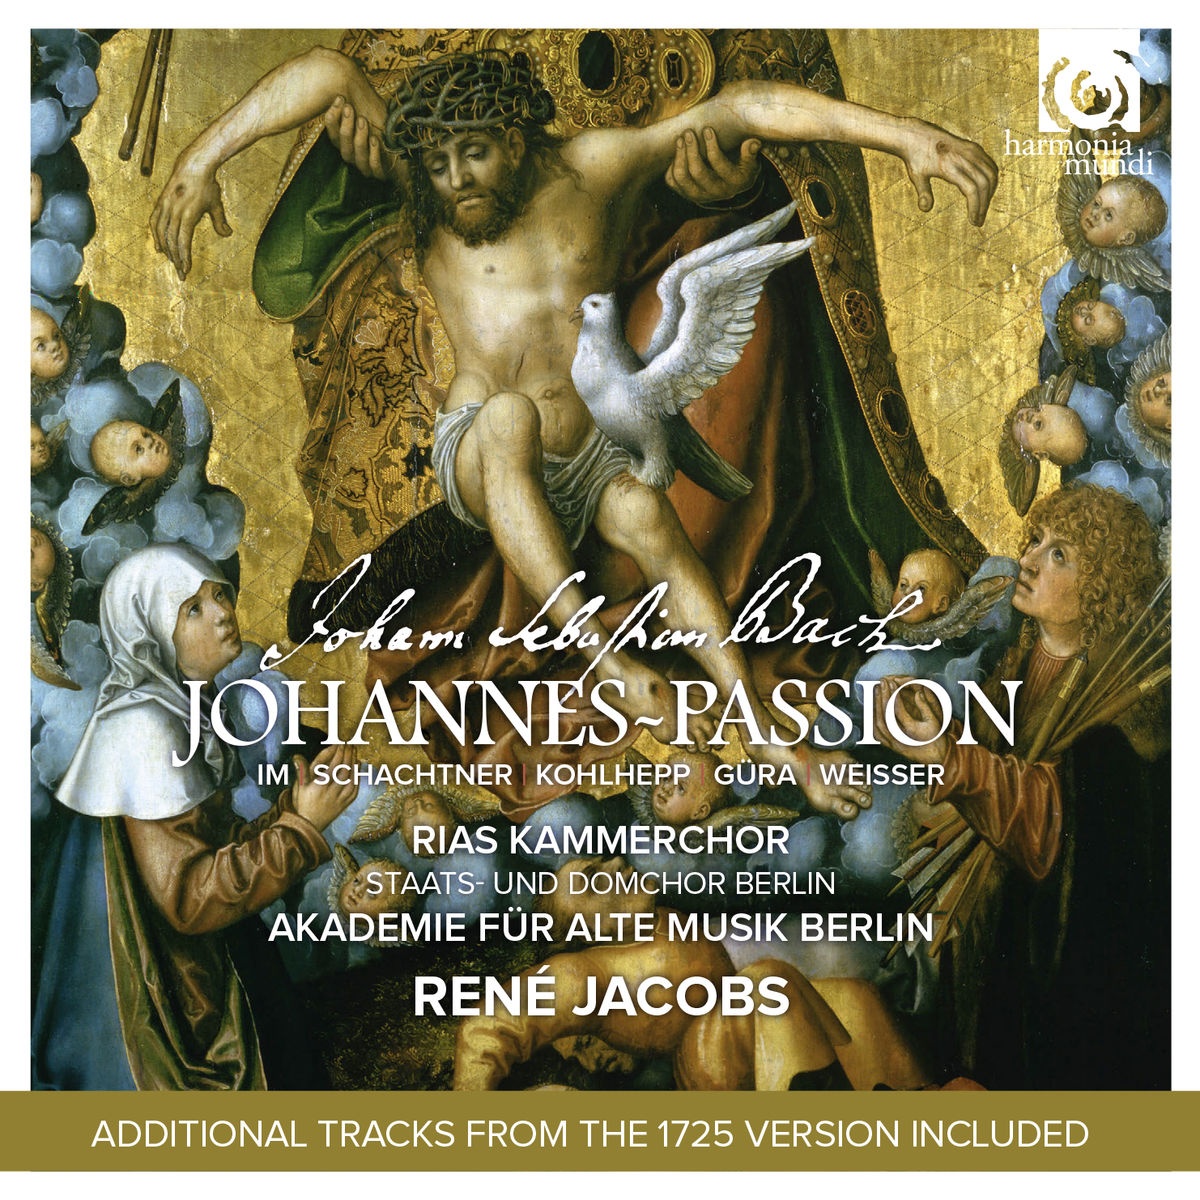 Bach: St. John Passion, BWV 245 (Johannes-Passion) [Deluxe Edition]